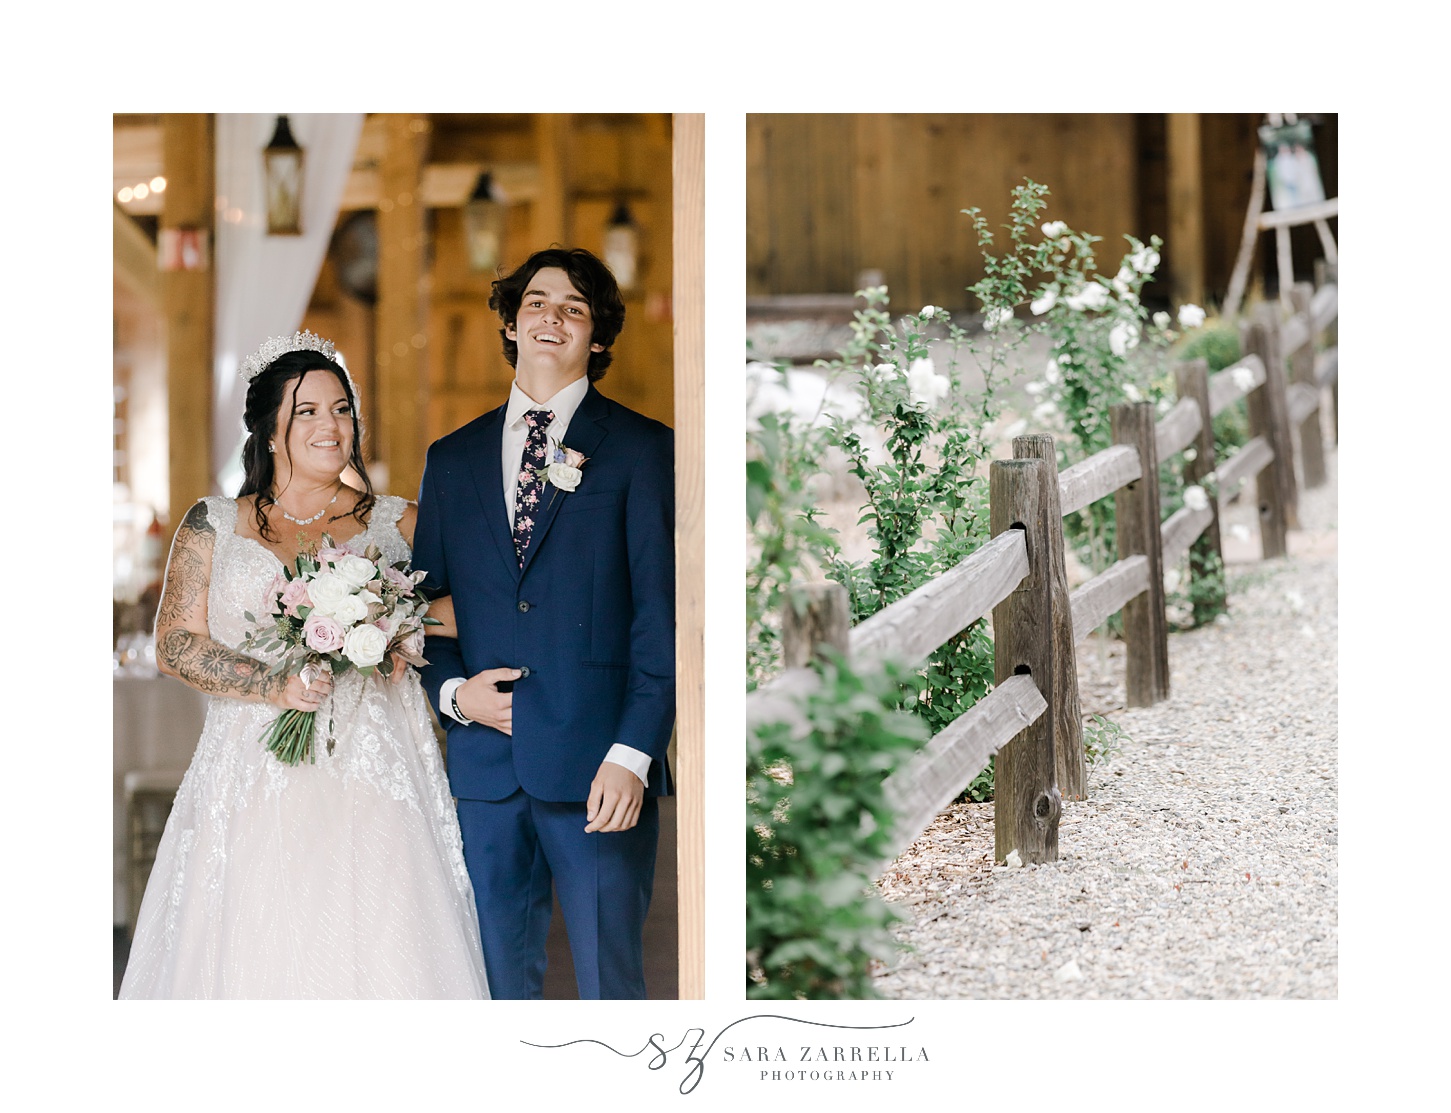 brother walks with bride down aisle for Blissful Meadows wedding ceremony